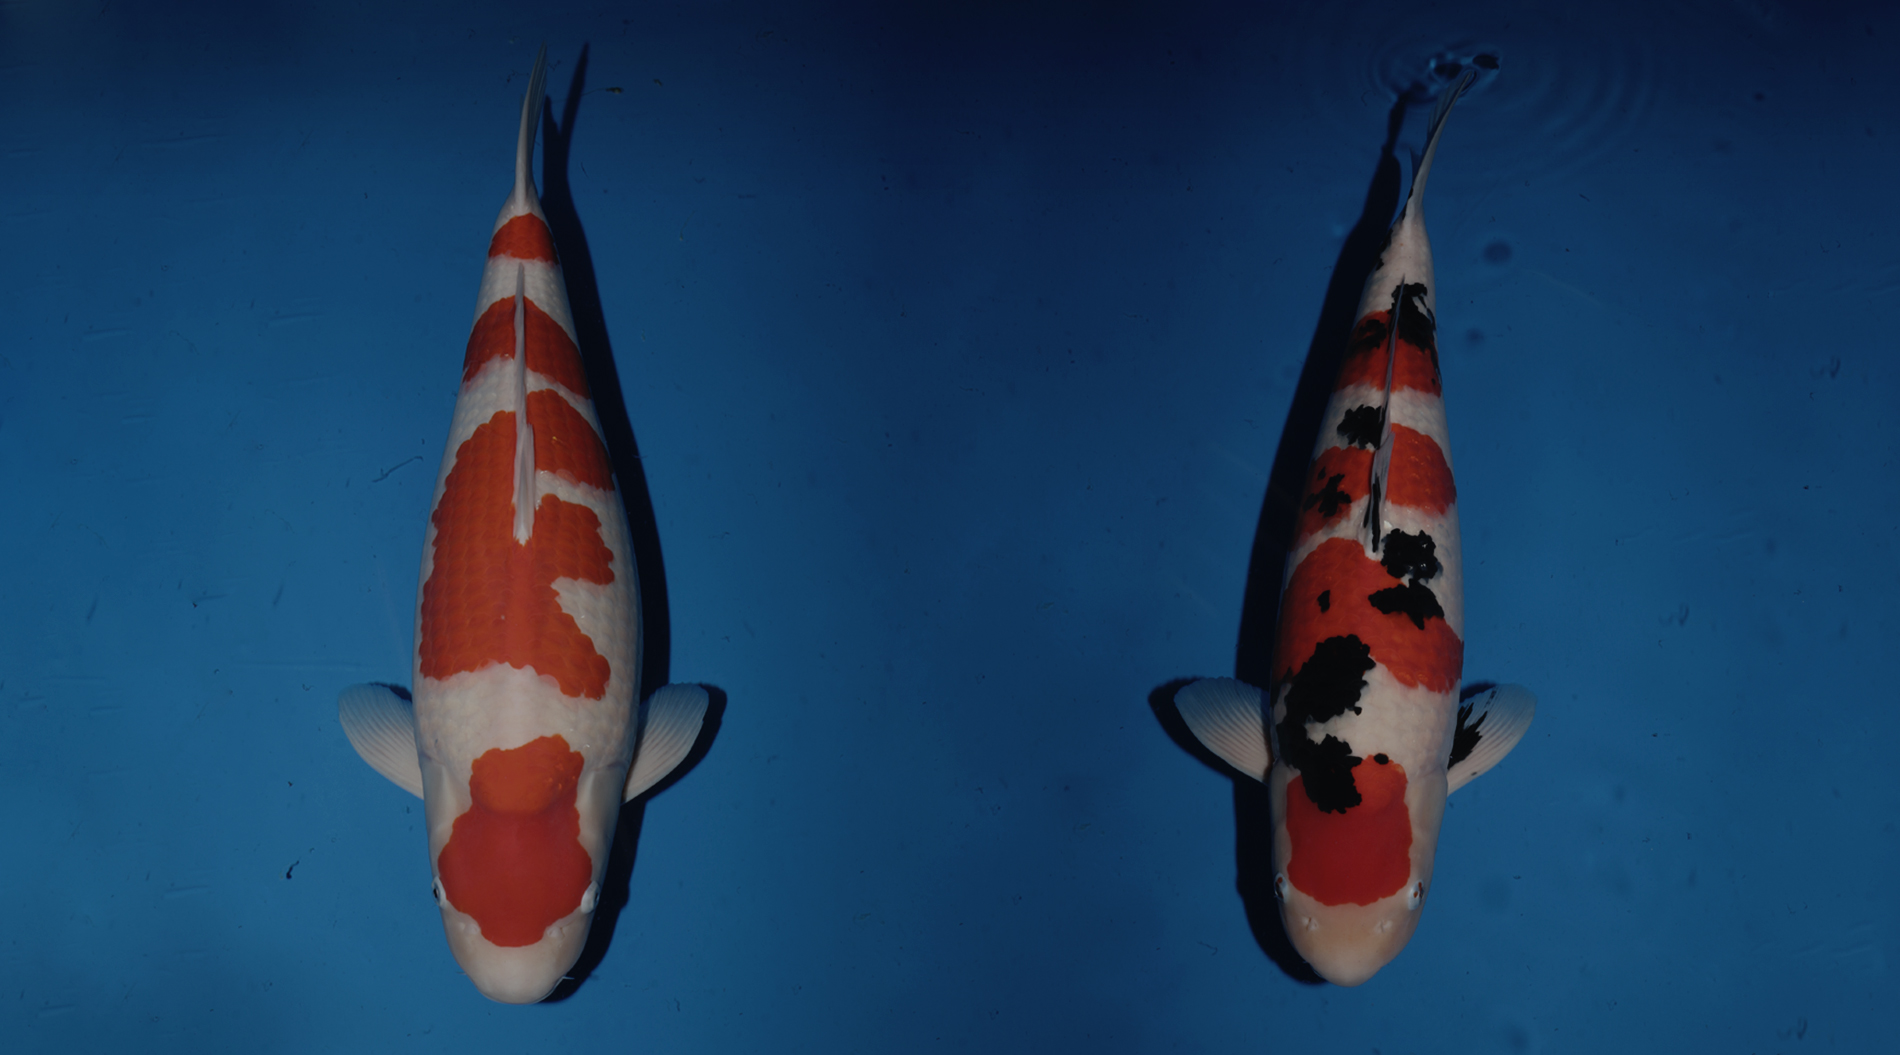 The Finest Quality Japanese Koi